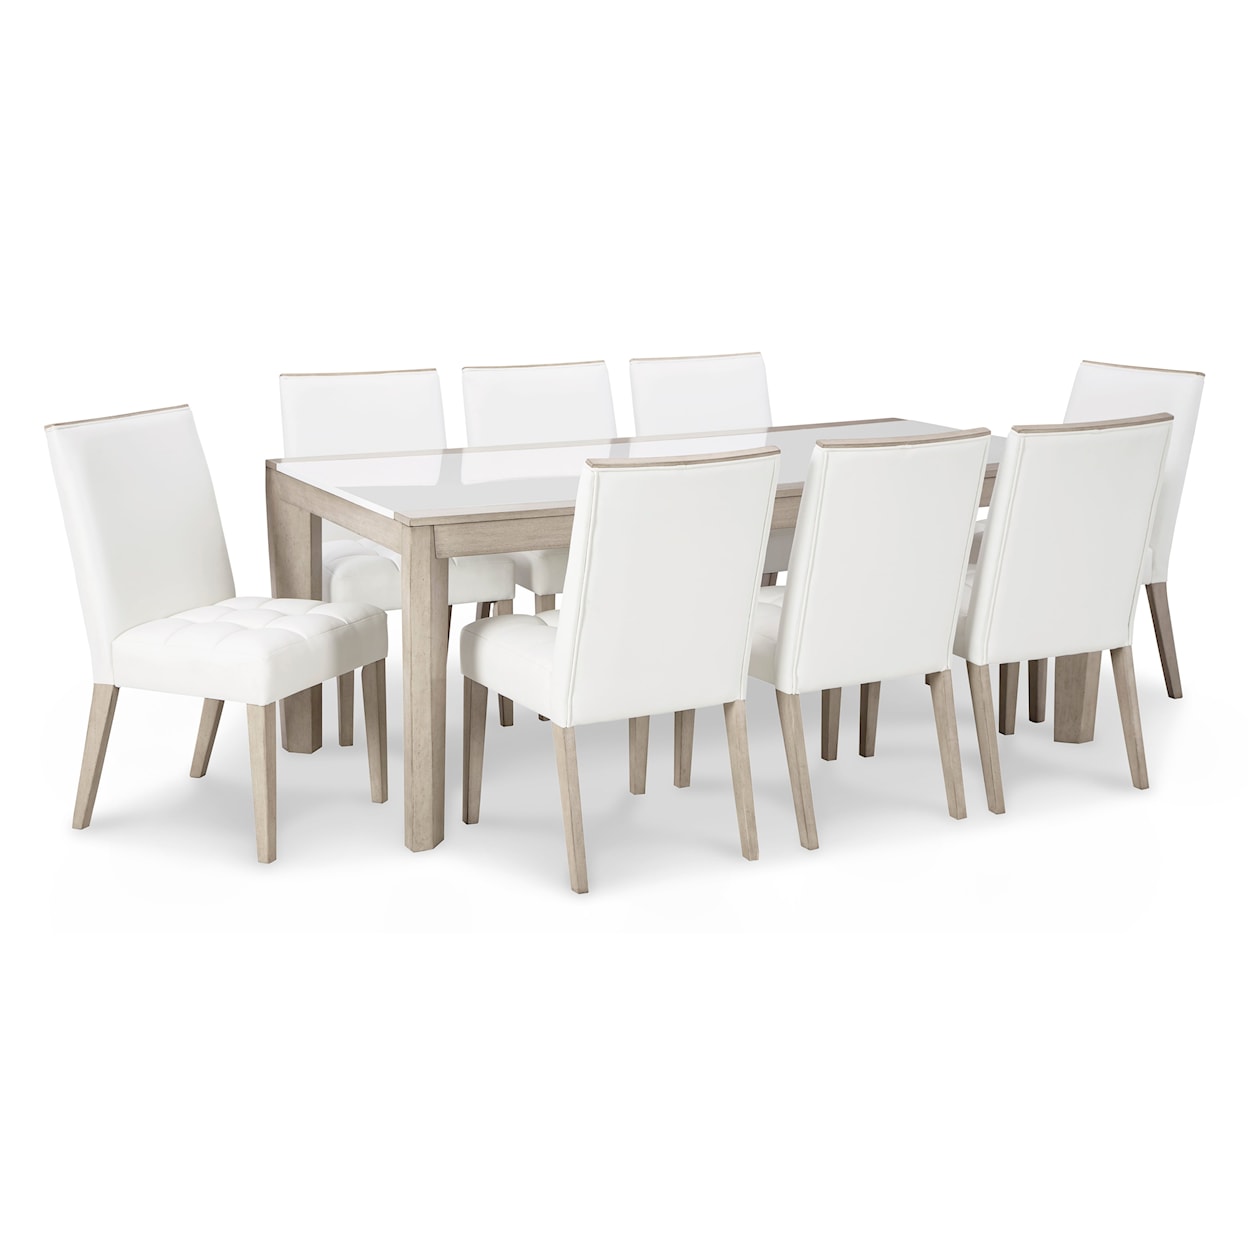 Ashley Furniture Signature Design Wendora Table and 8 Chair Dining Set